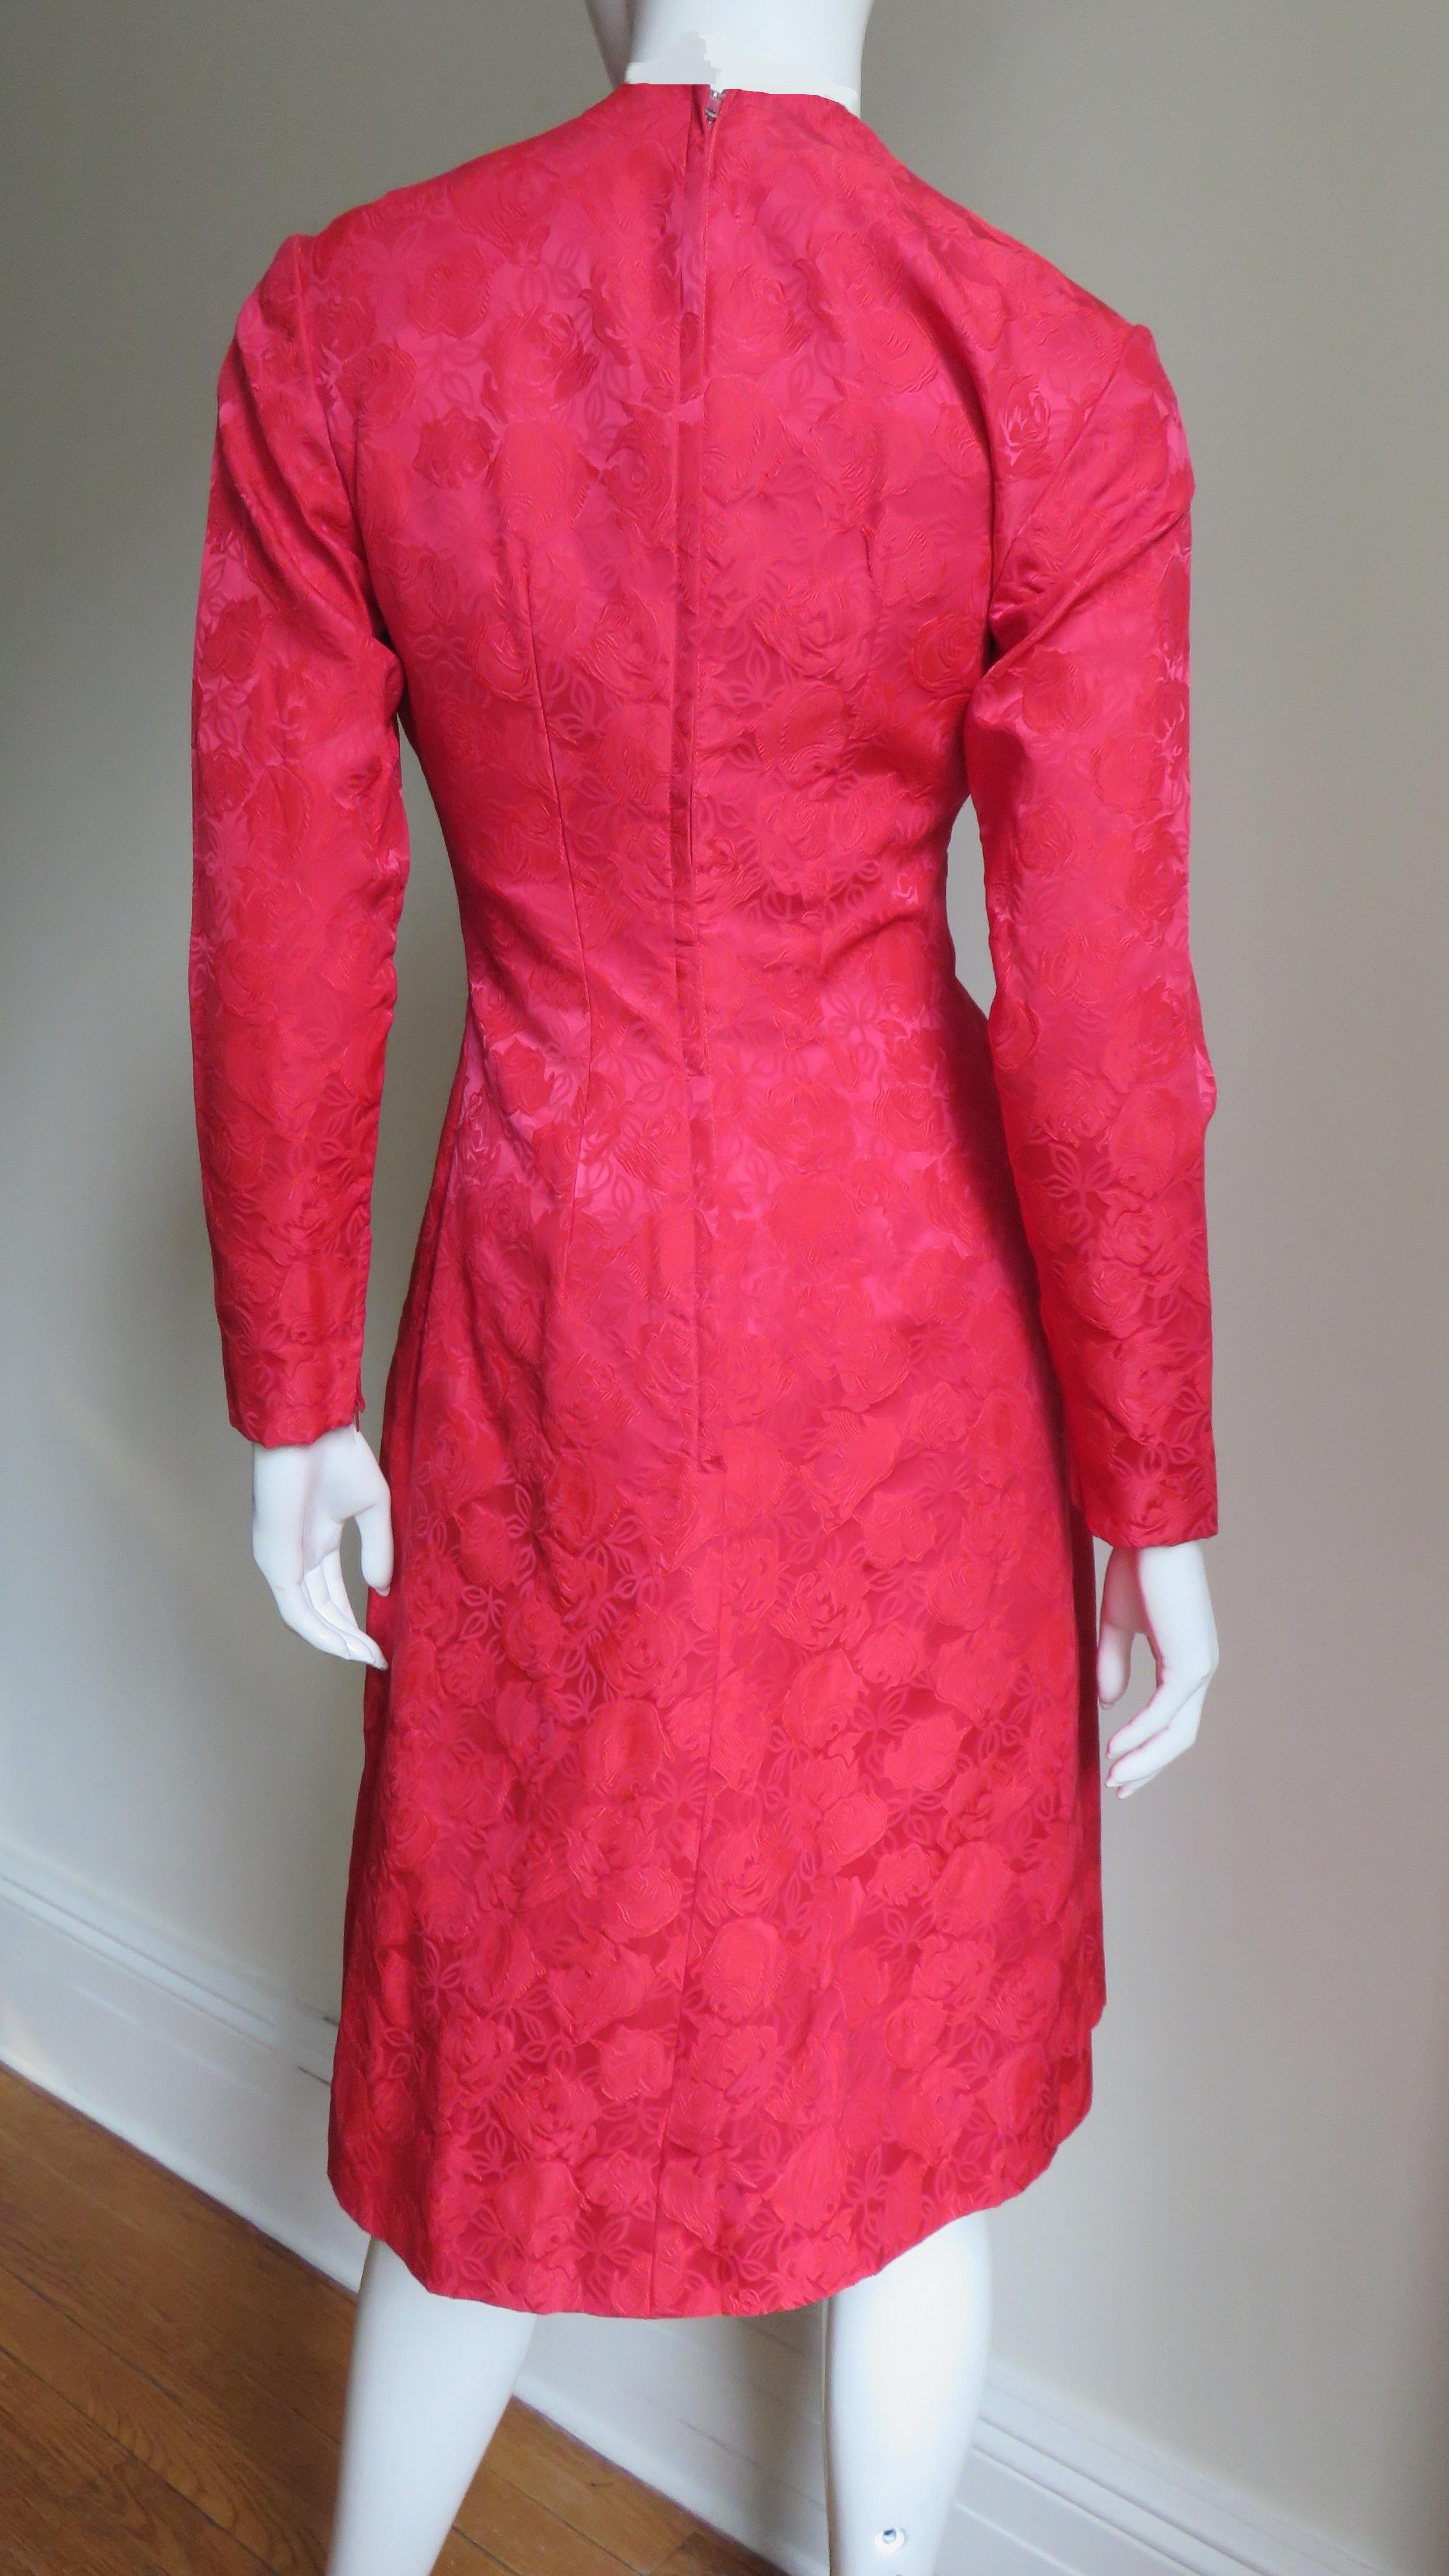 Suzy Perette New Damask Dress and Overdress 1950s 9